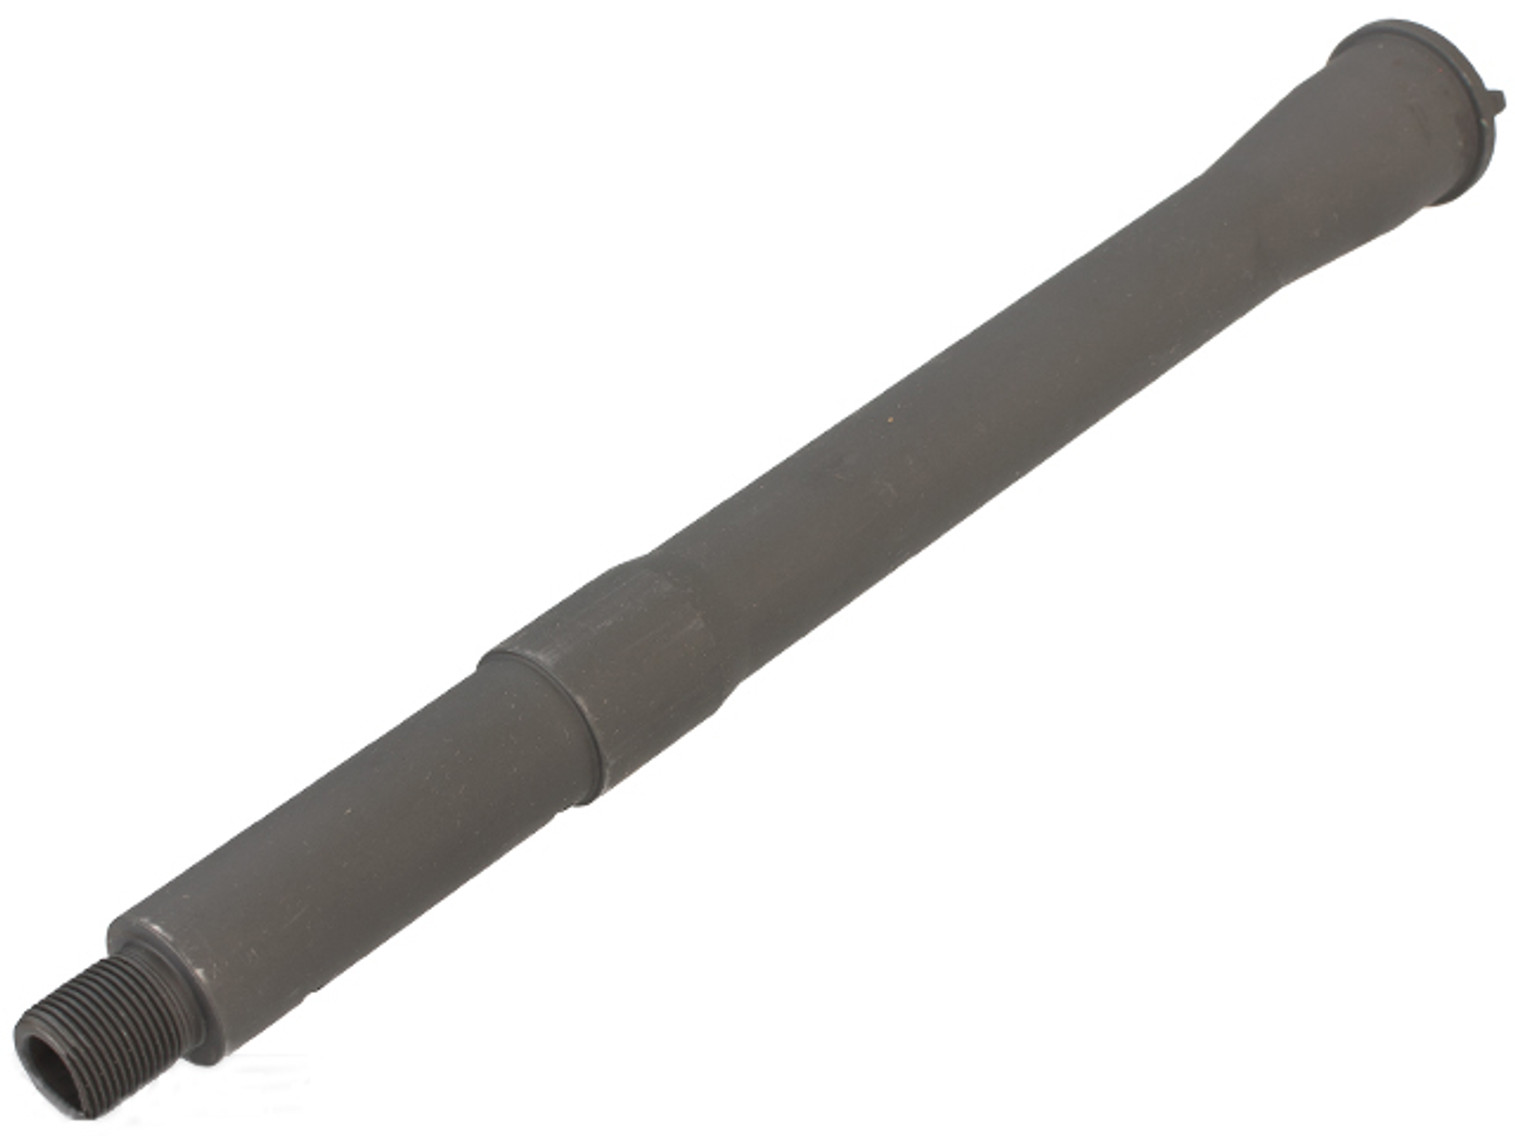 WE-Tech CQB Outer Barrel for M4 Series Airsoft GBB Rifles